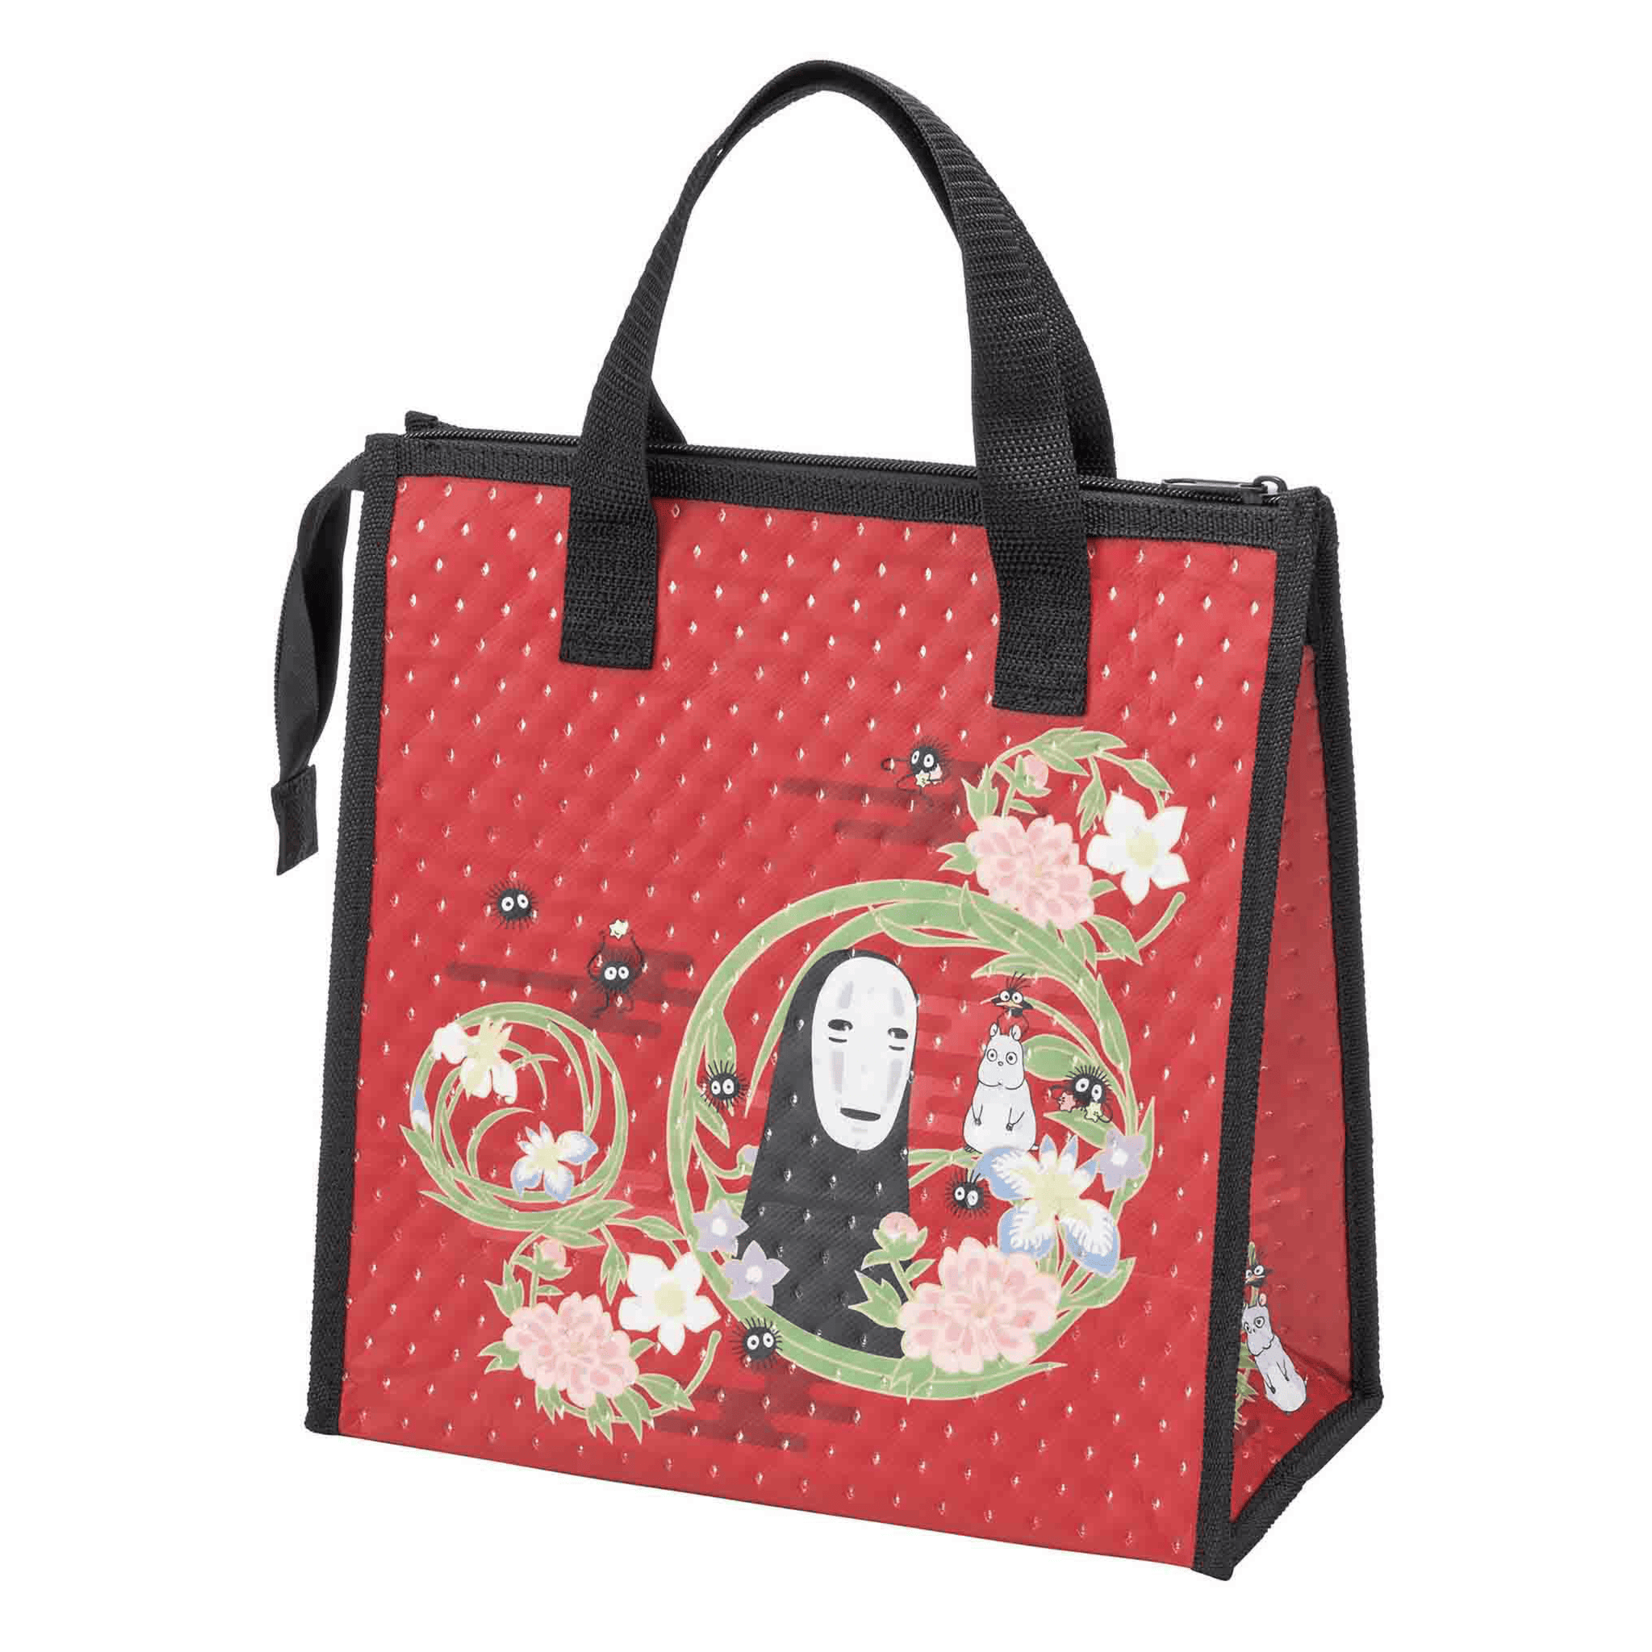 Skater Insulated Lunch Tote - Spirited Away (Dark Red) SK-GHB-64516